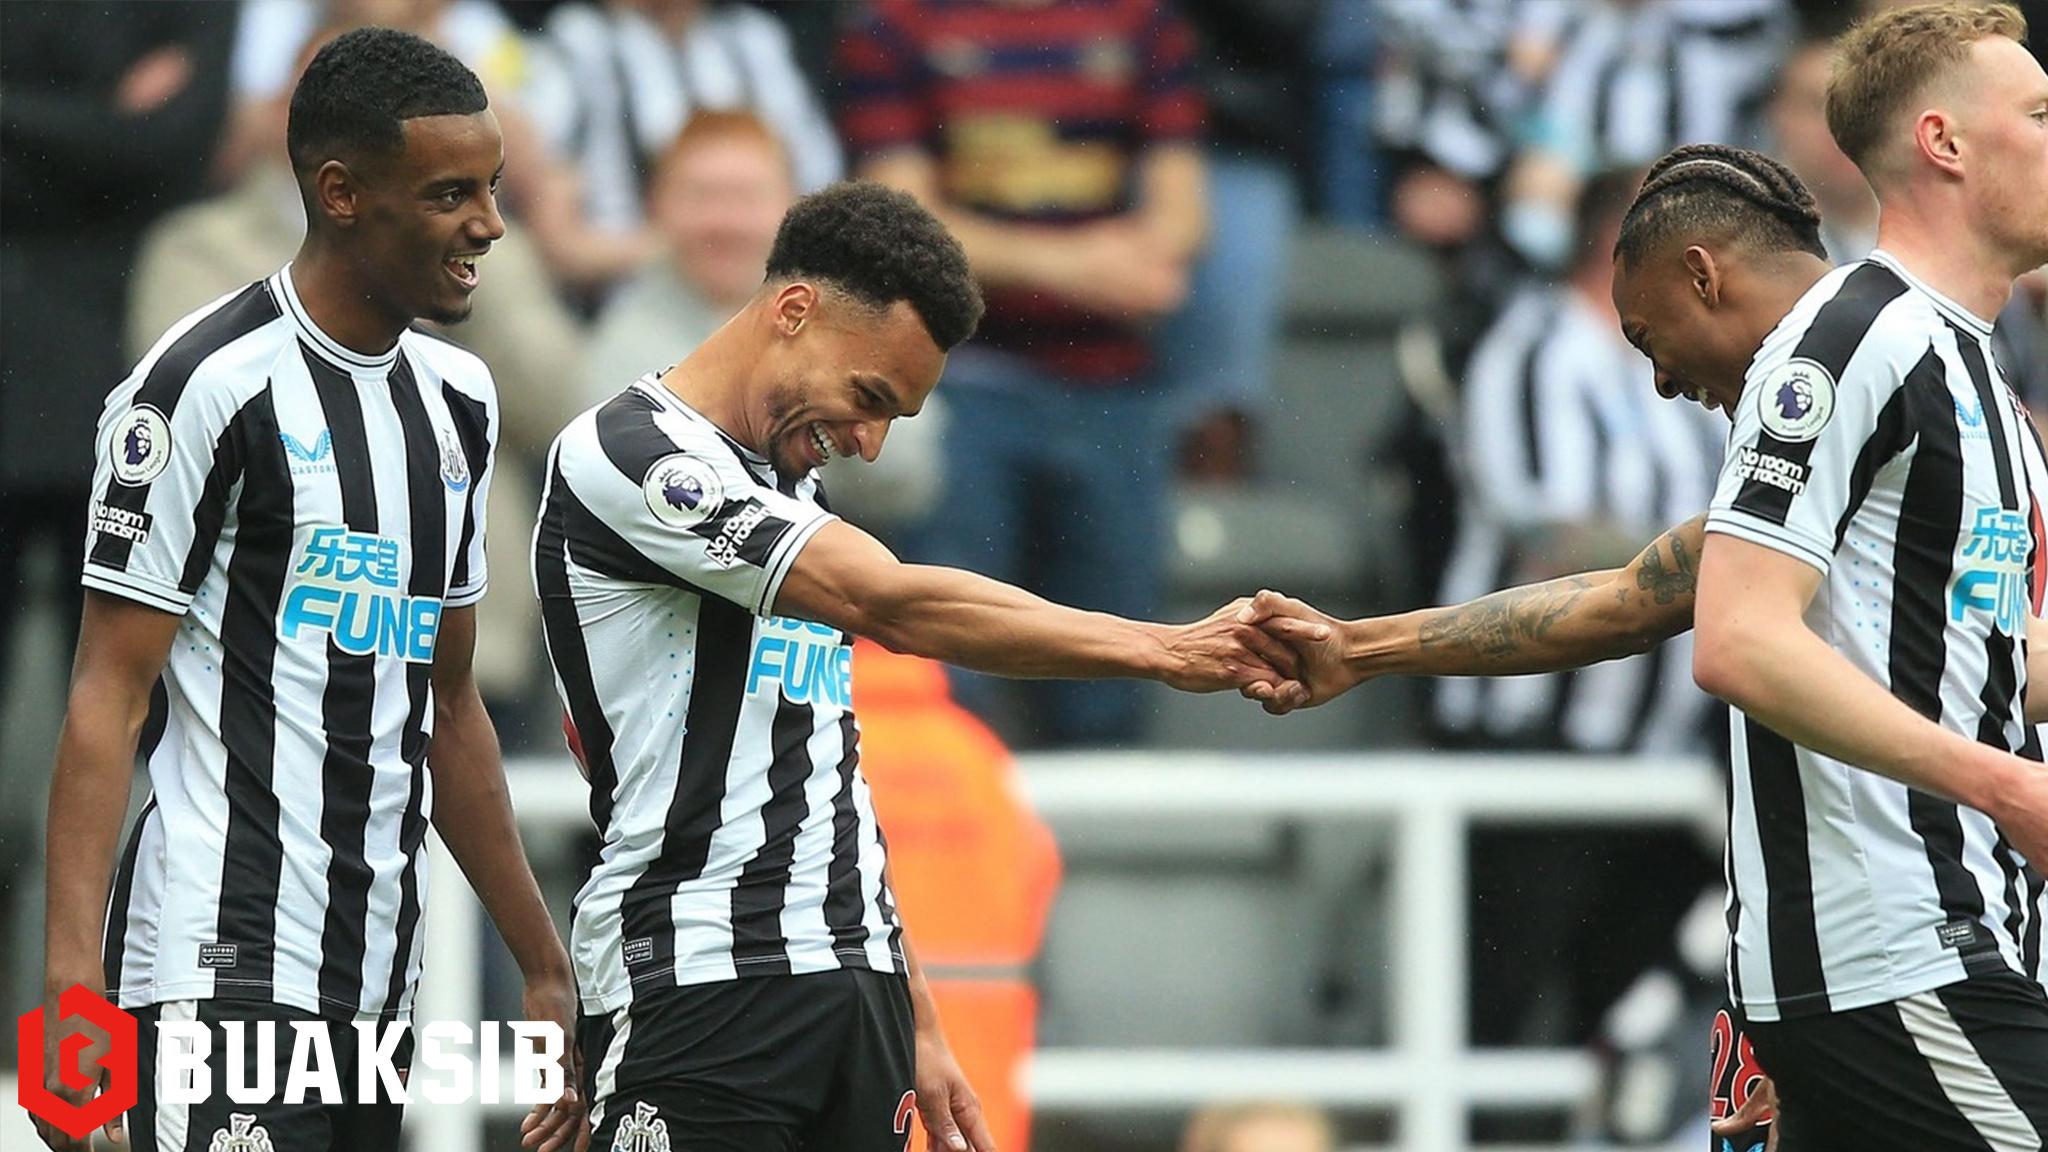 Newcastle United's 6-1 Dominance Over Spurs Showcased Their Premier League Ambitions